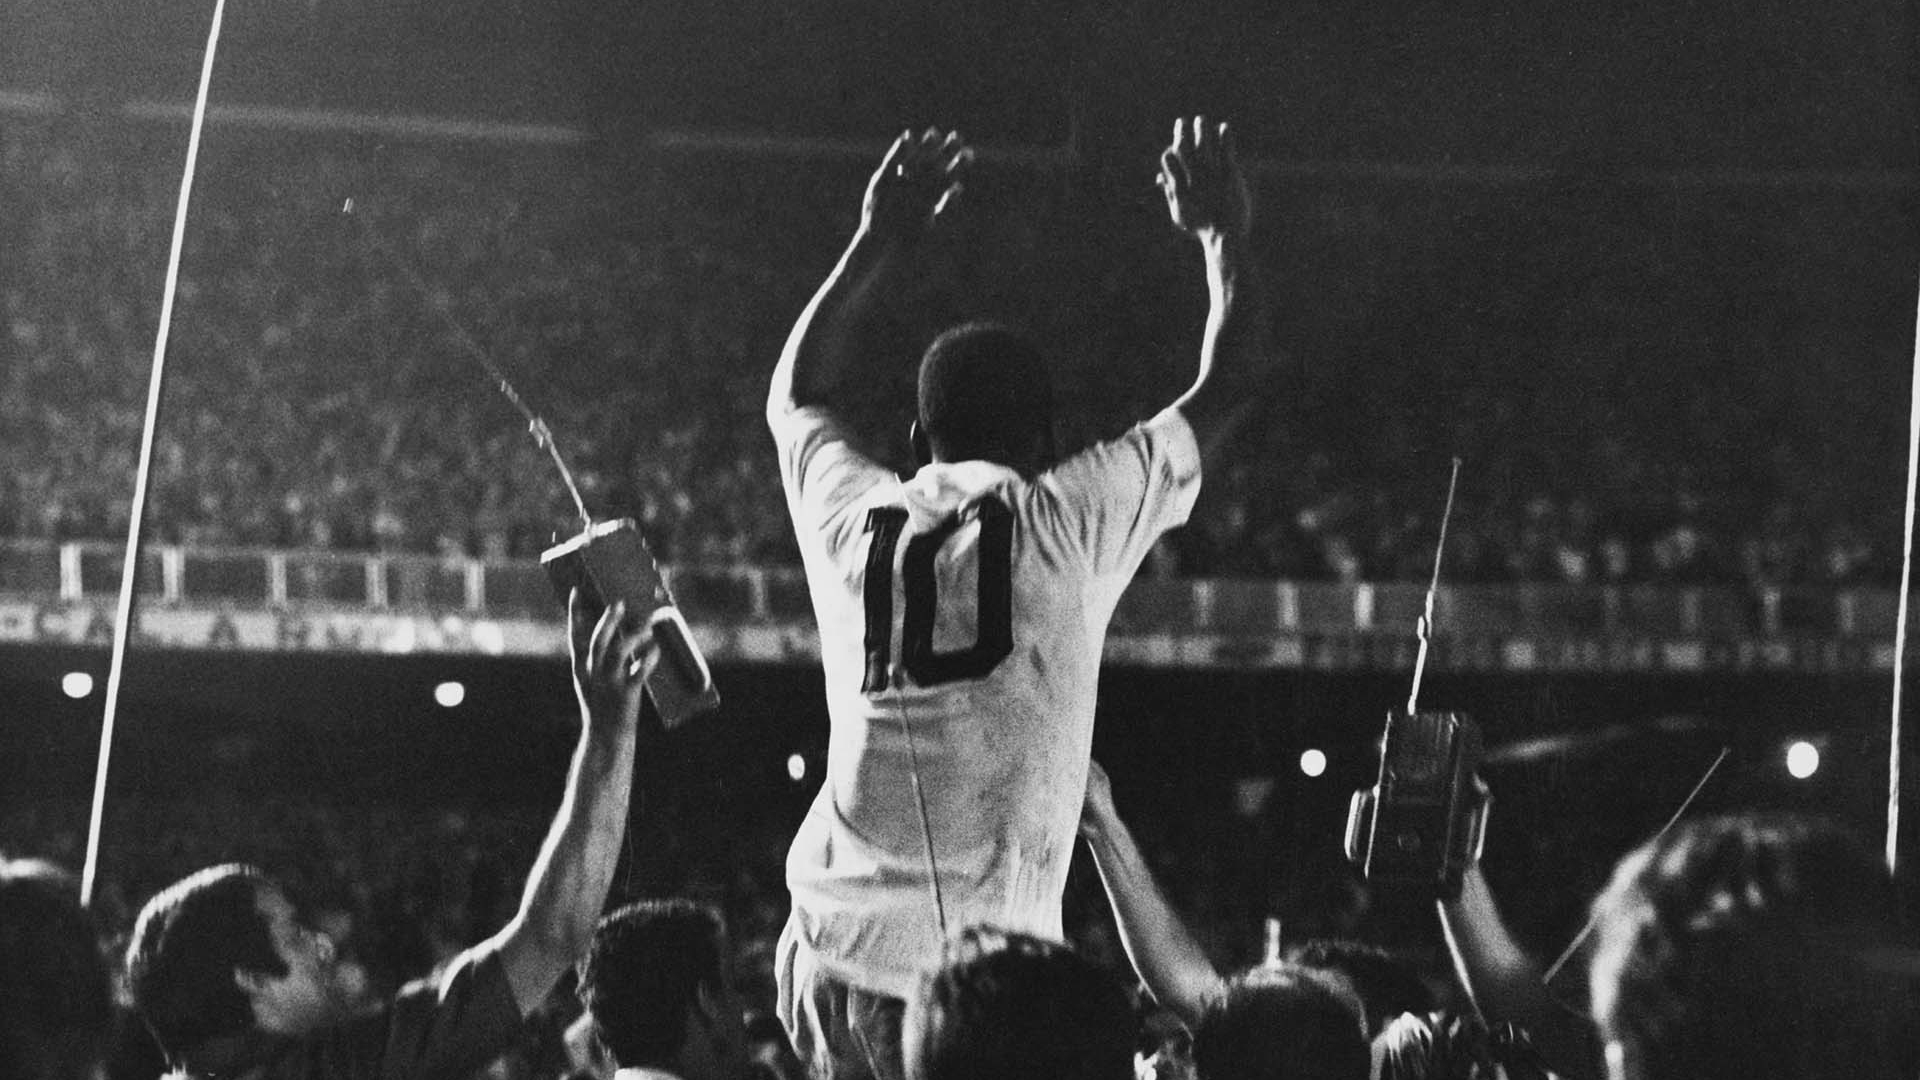 Pele is lifted up by his Santos team mates after scoring the 1,000th goal of his career during a game against Vasco da Gama at the Maracana Stadium, Rio de Janeiro, Brazil, 19th November 1969. (Photo by Pictorial Parade/Archive Photos/Getty Images)